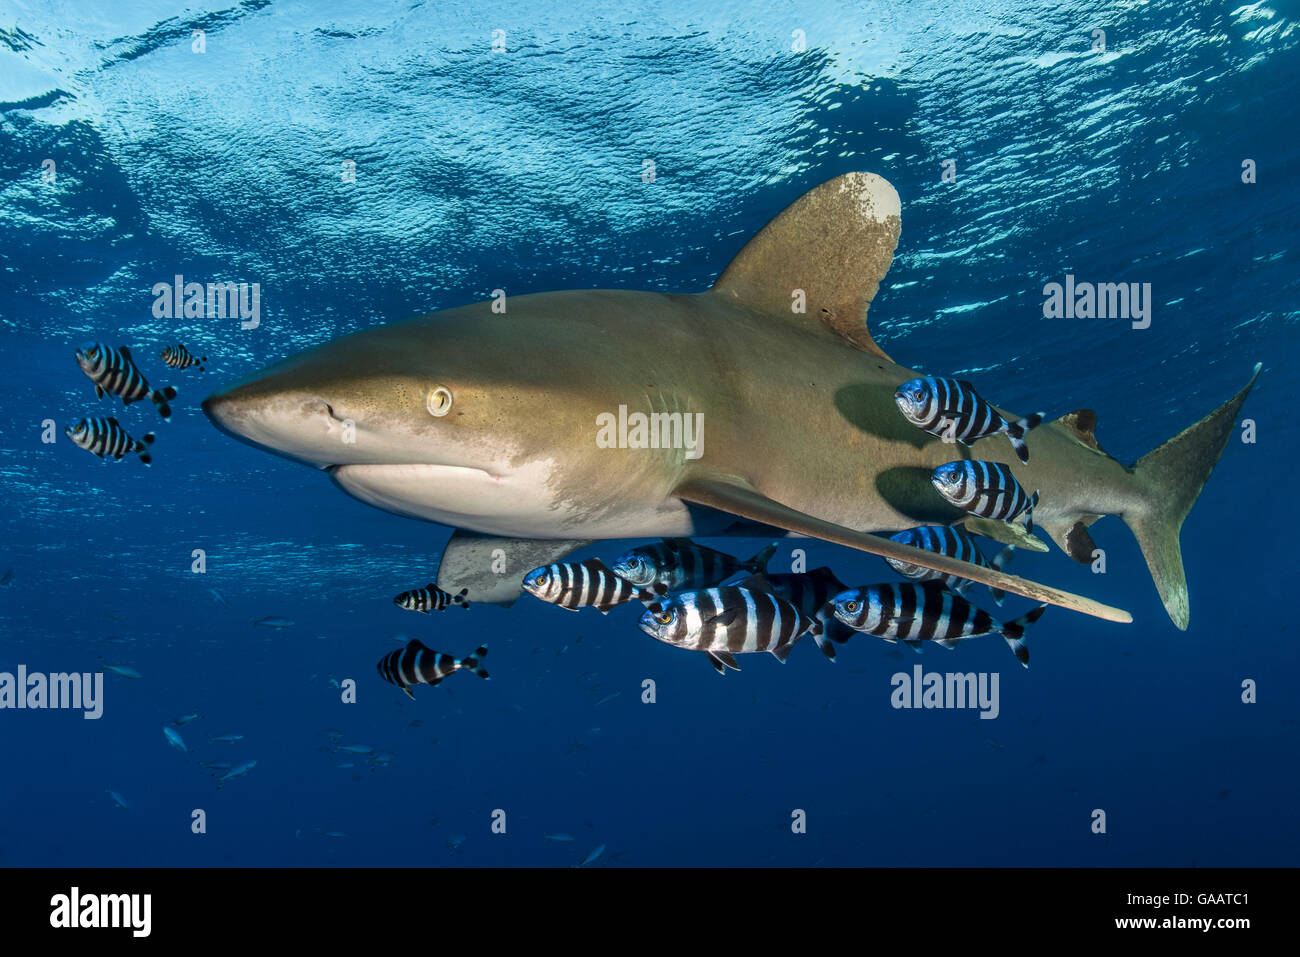 Oceanic whitetip shark (Carcharhinus longimanus) accompanied by pilotfish (Naucrates ductor) as it cruises beneath the surface of the Red Sea, close to Little Brother Island. The Brothers Islands, Egypt. Red Sea. Endangered species. Stock Photo